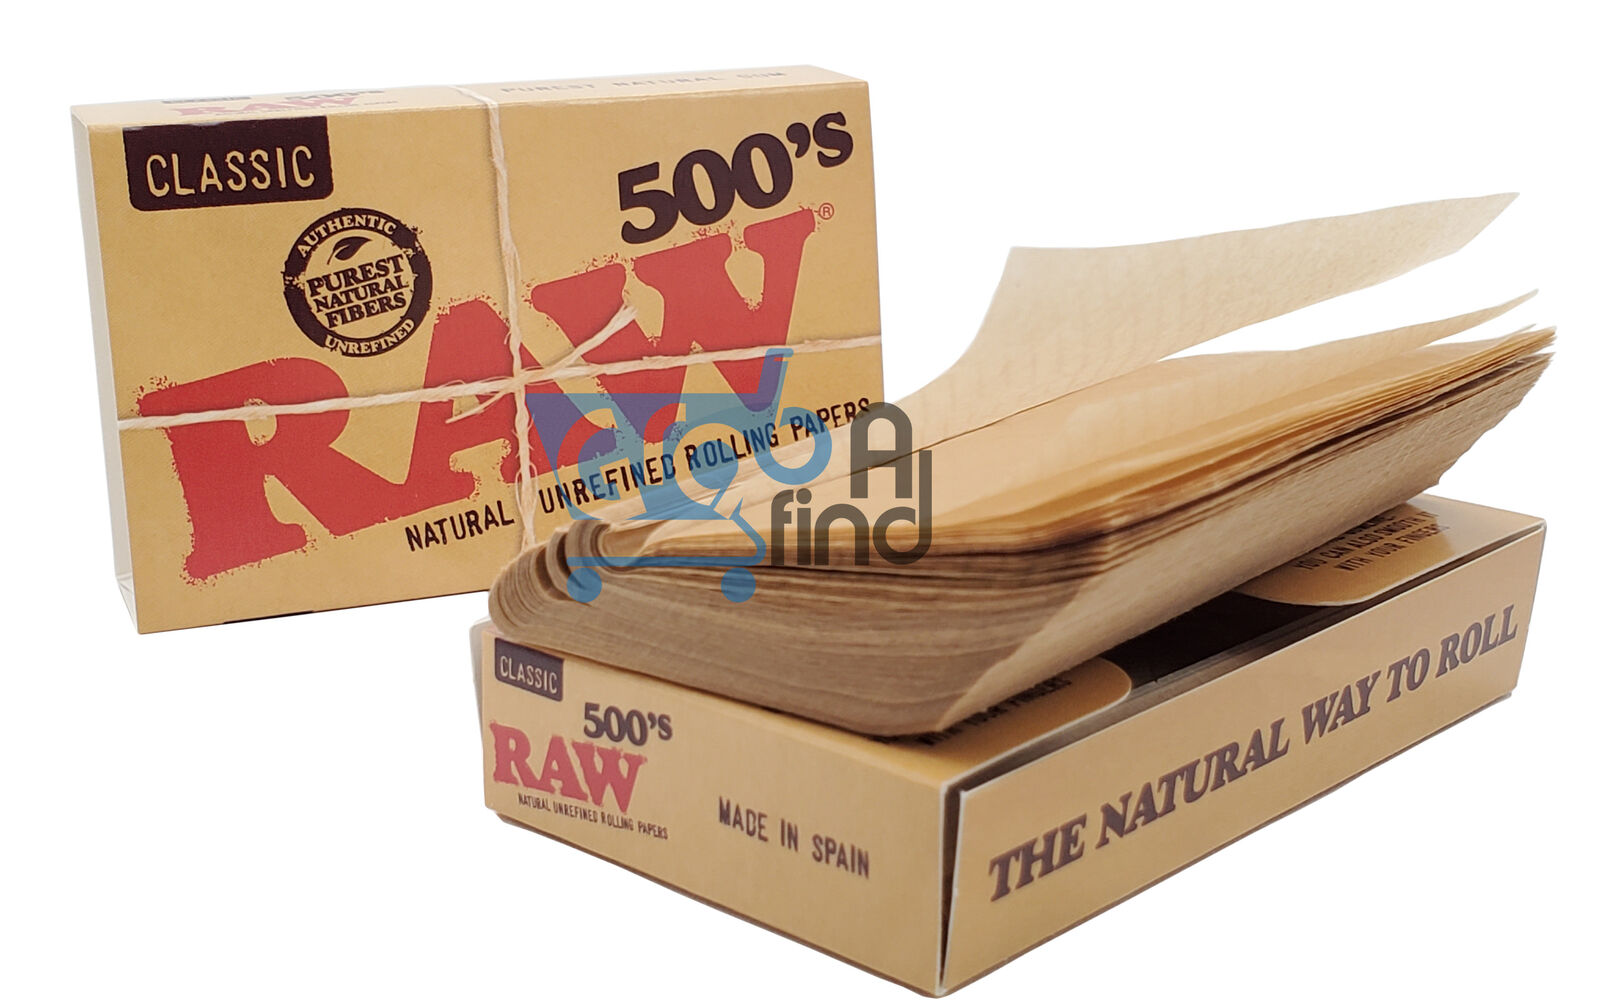 RAW 500's Classic- 1 1/4 - Natural Unrefined Rolling Paper -1 Pack of 500 Papers